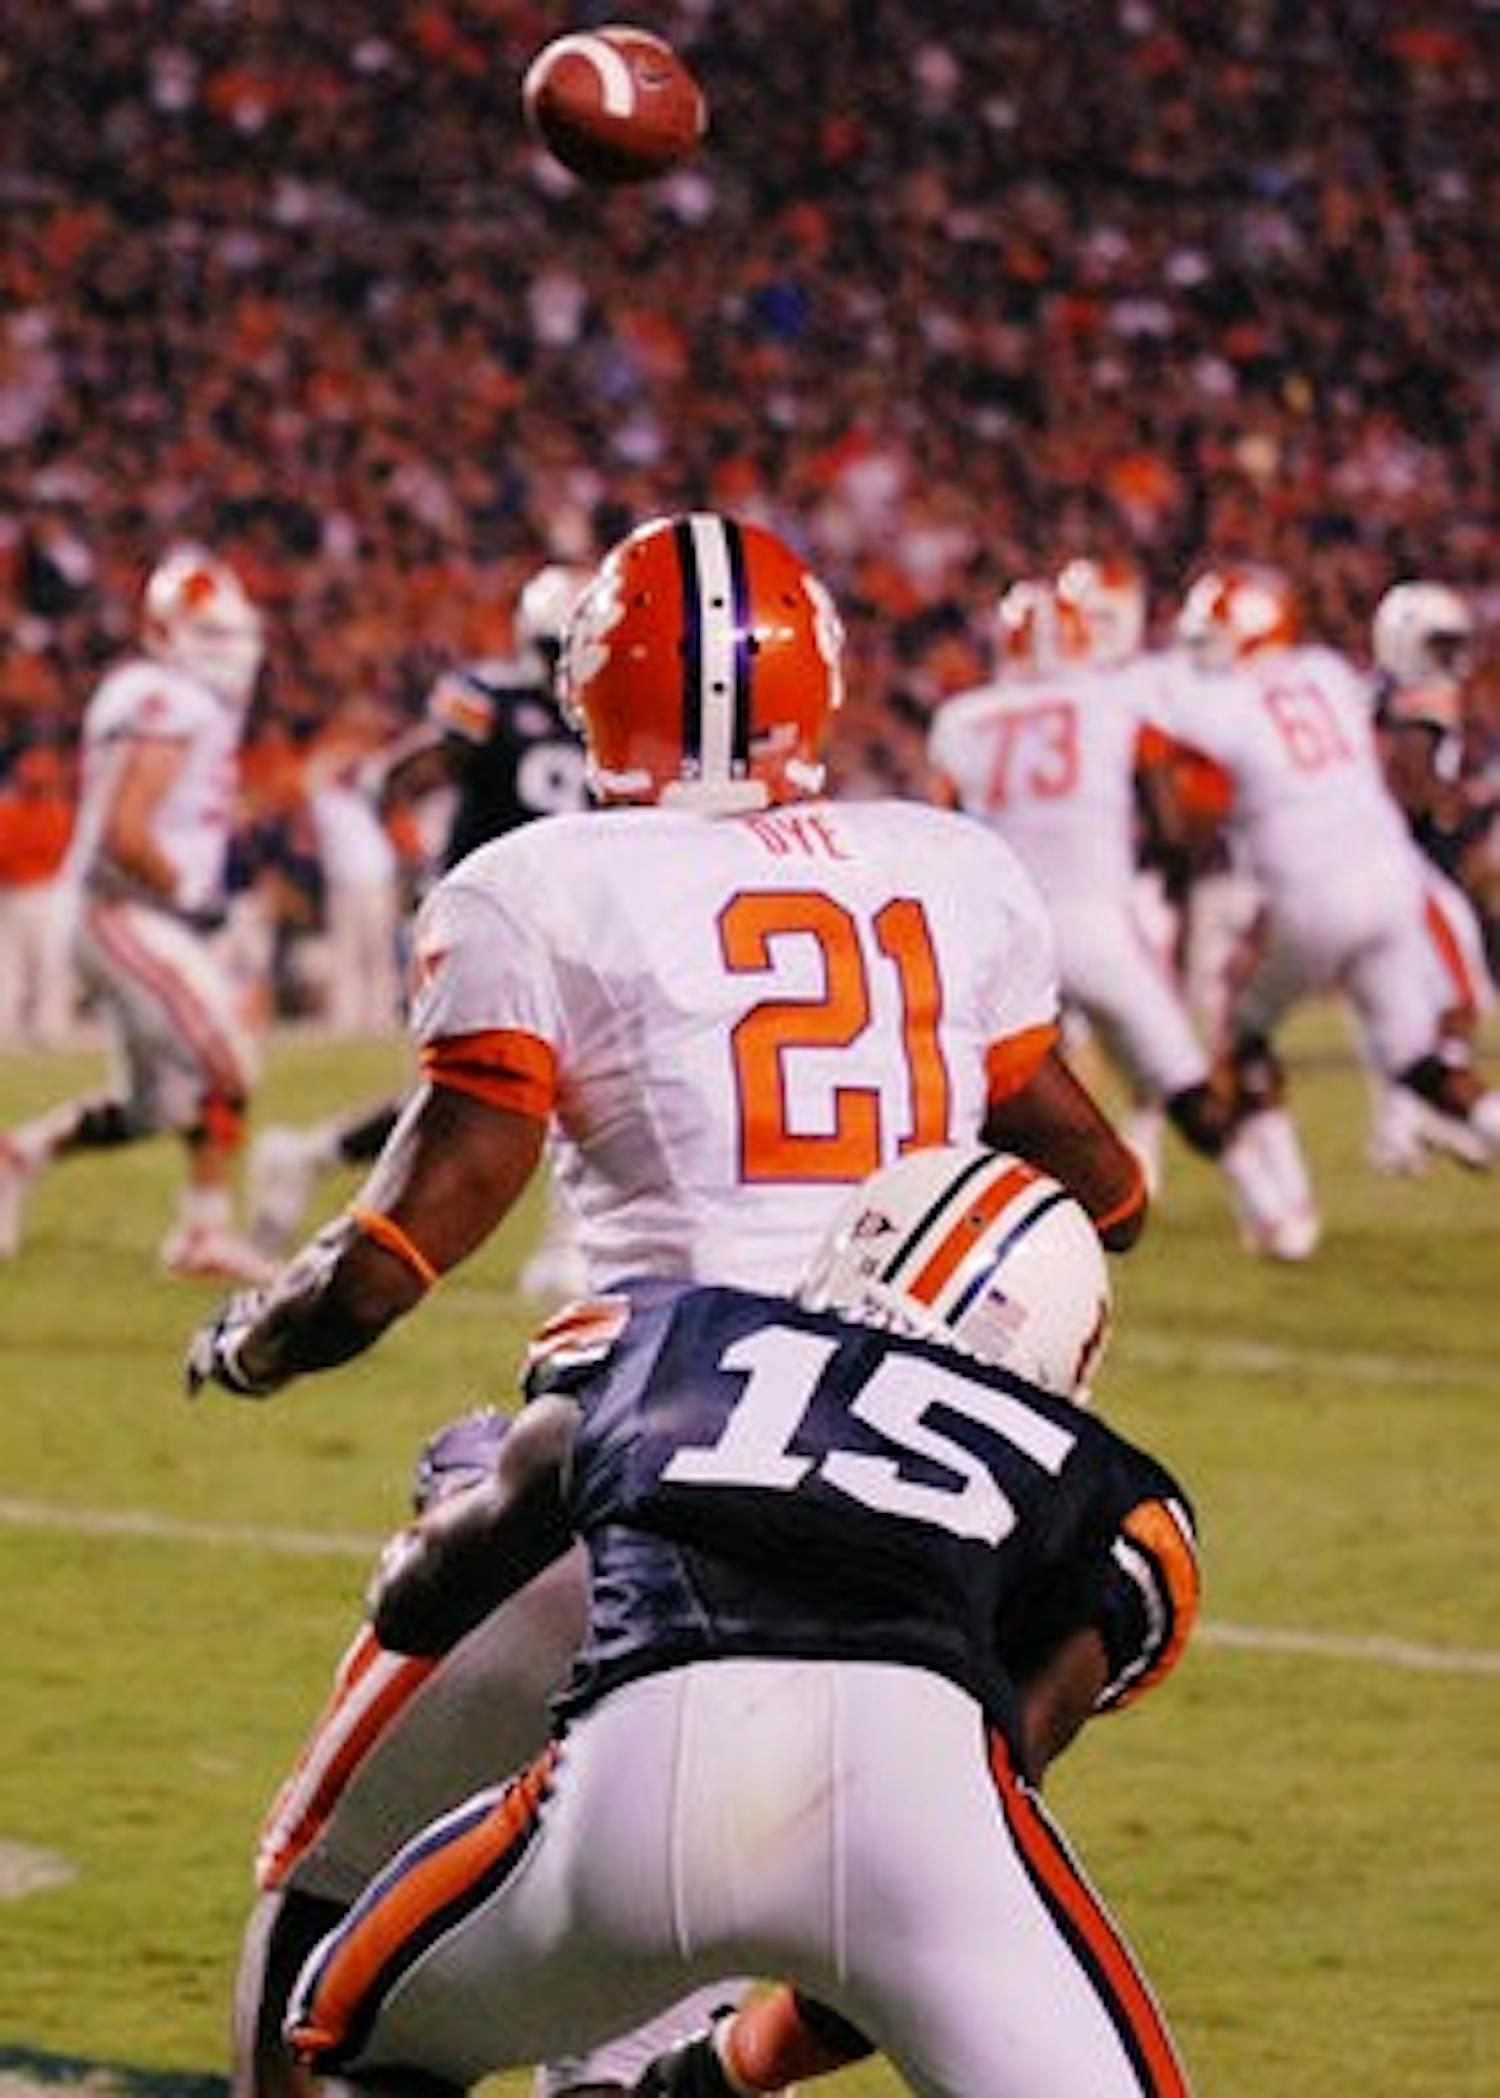 Auburn defensive back Neiko Thorpe tackles an opposing Tiger during the 2010 Auburn vs. Clemson game. (CONTRIBUTED)